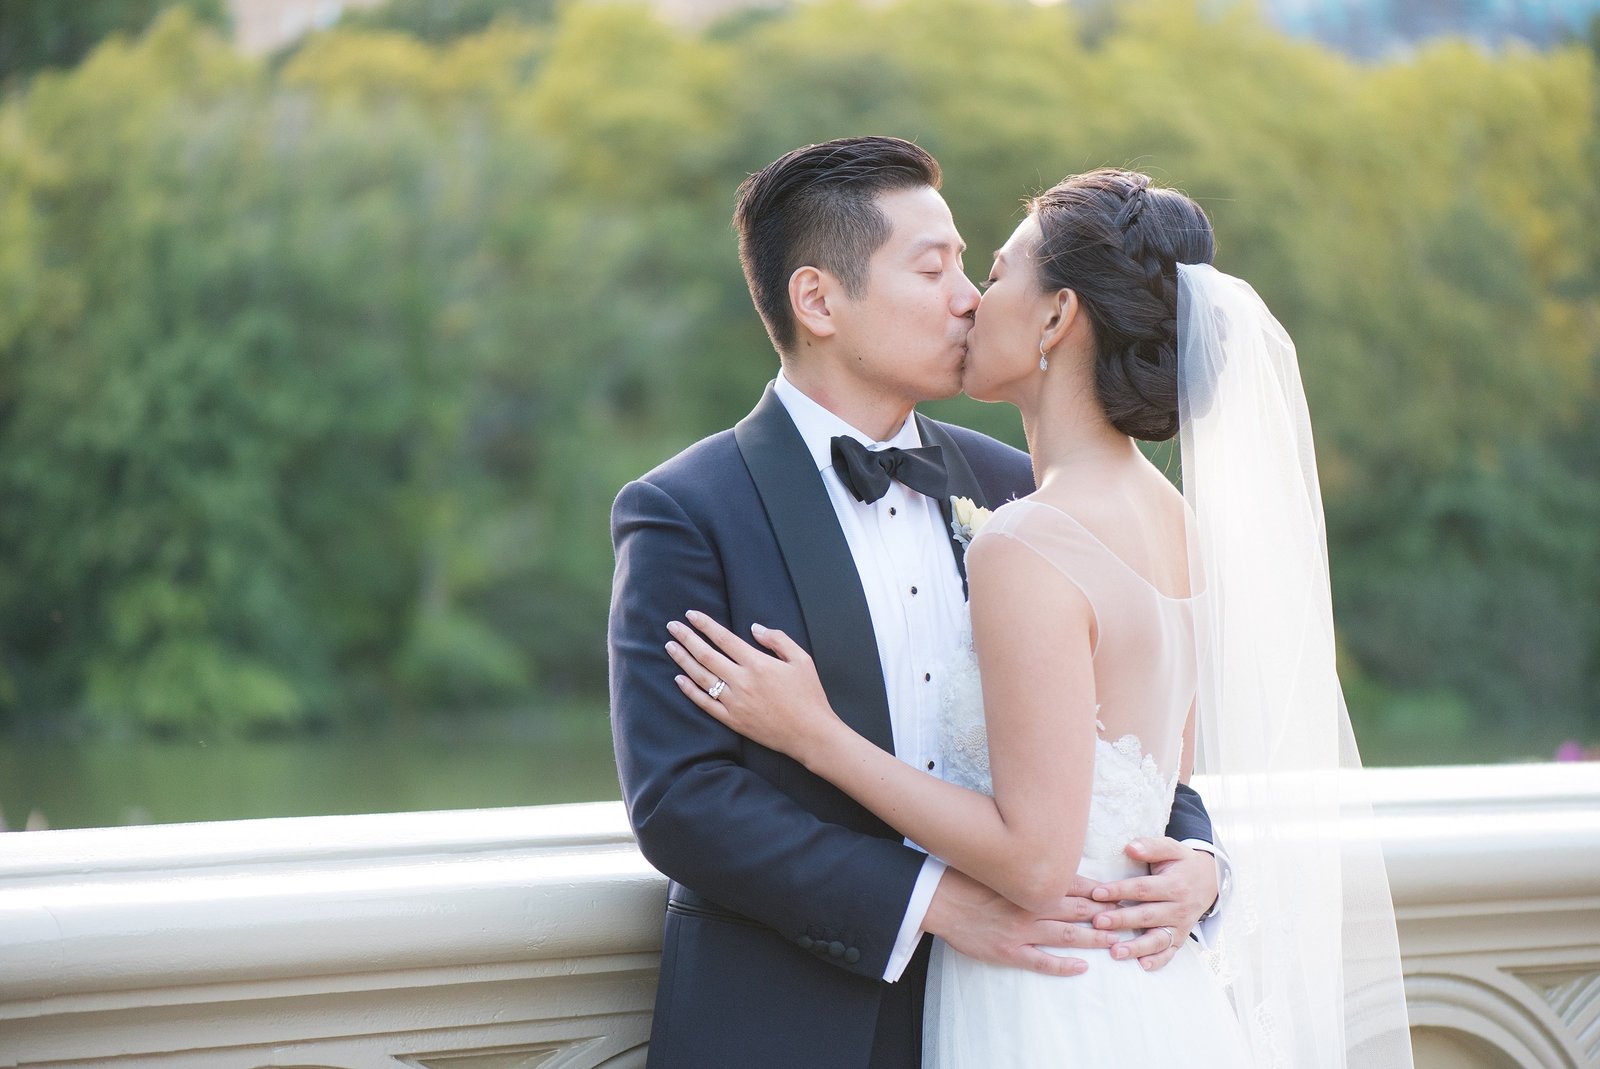 Asian Bride and Groom Kissing on Bow Bridge in Central Park, New York City Photo